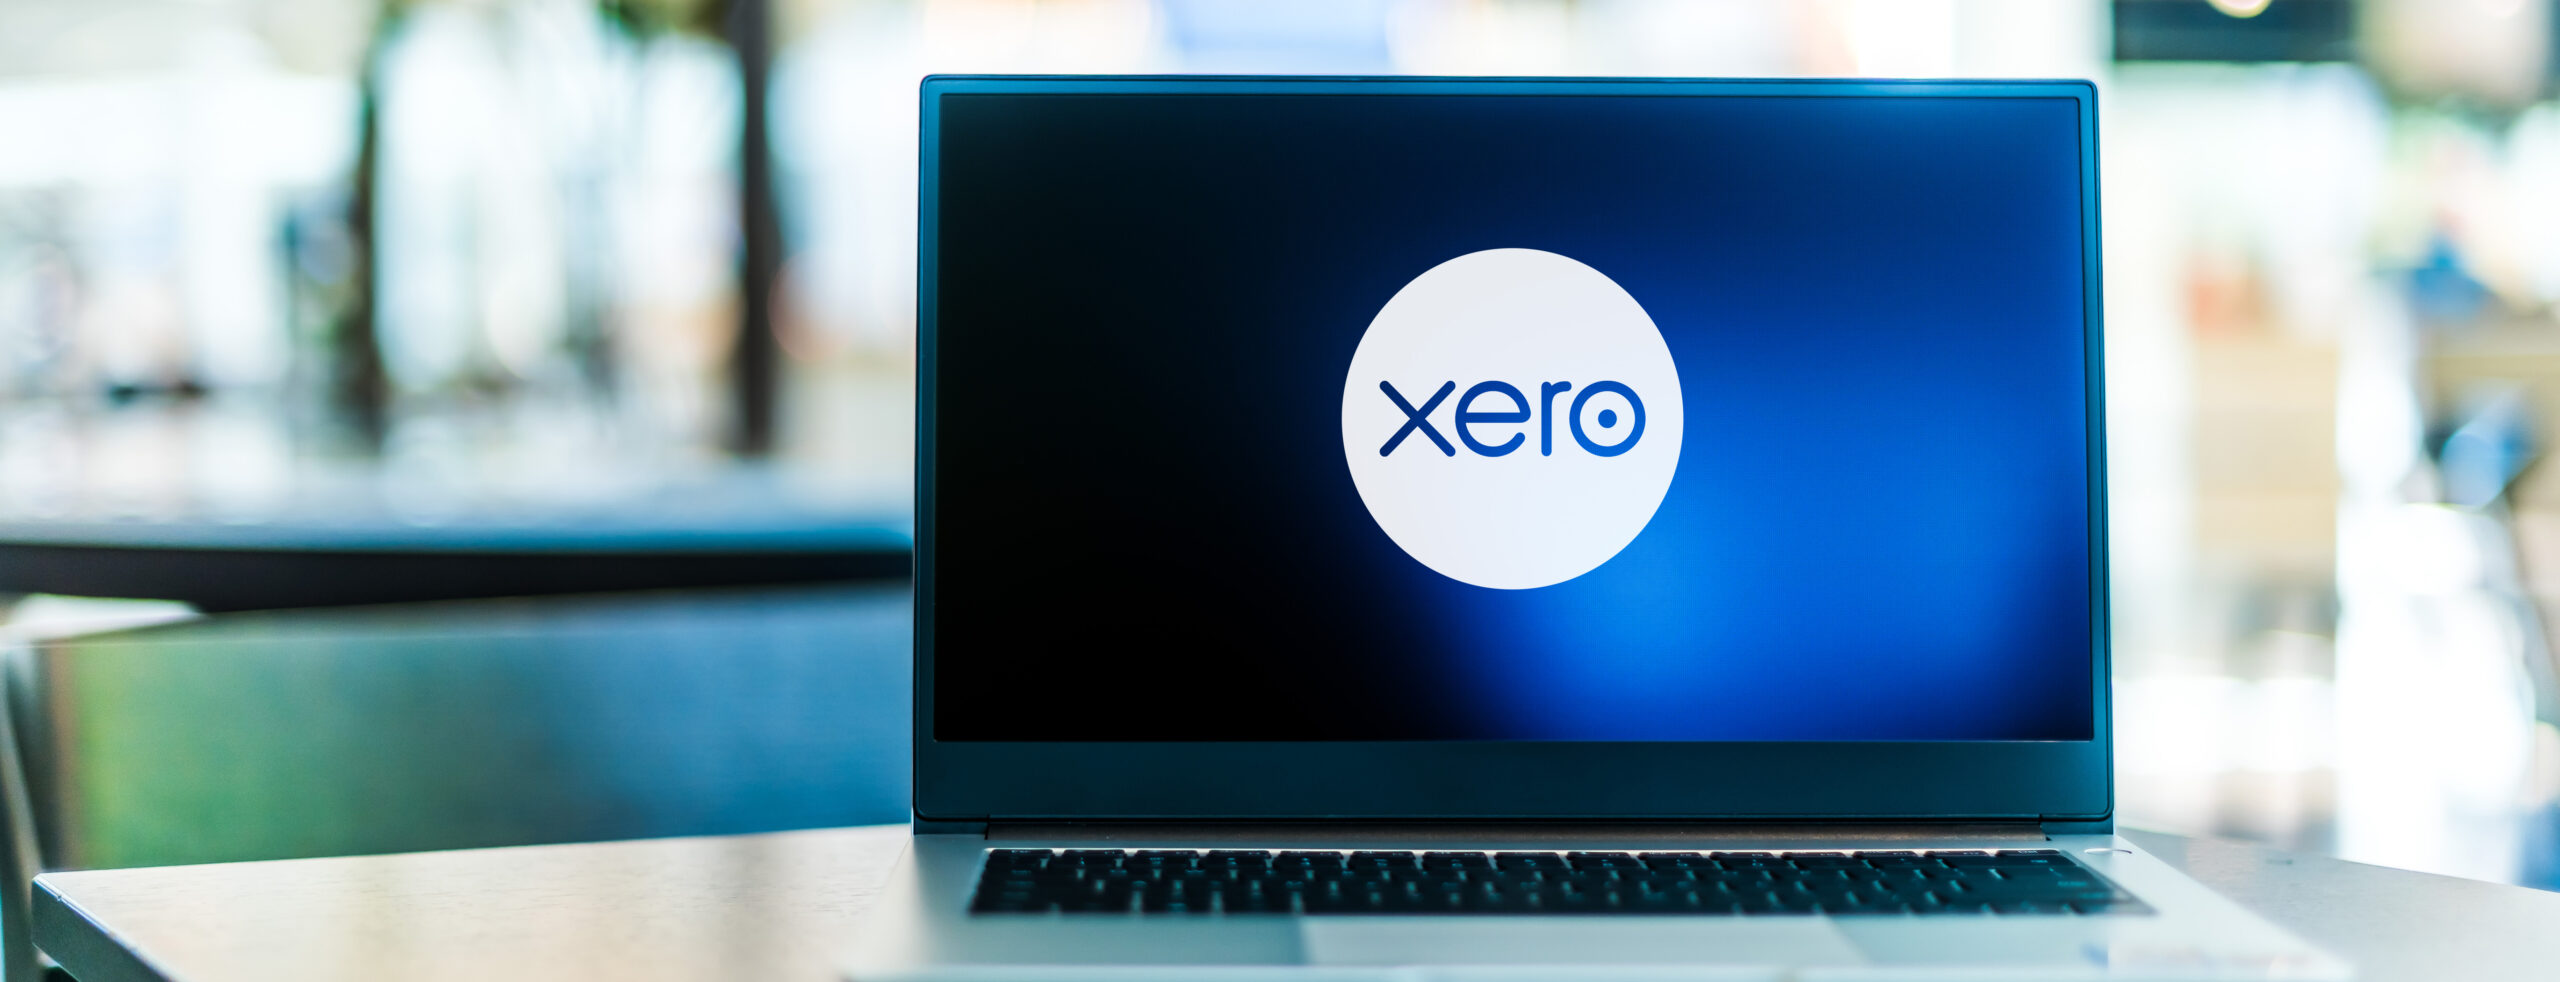 Moving Wholesale Business from Sage to Xero? Read This First